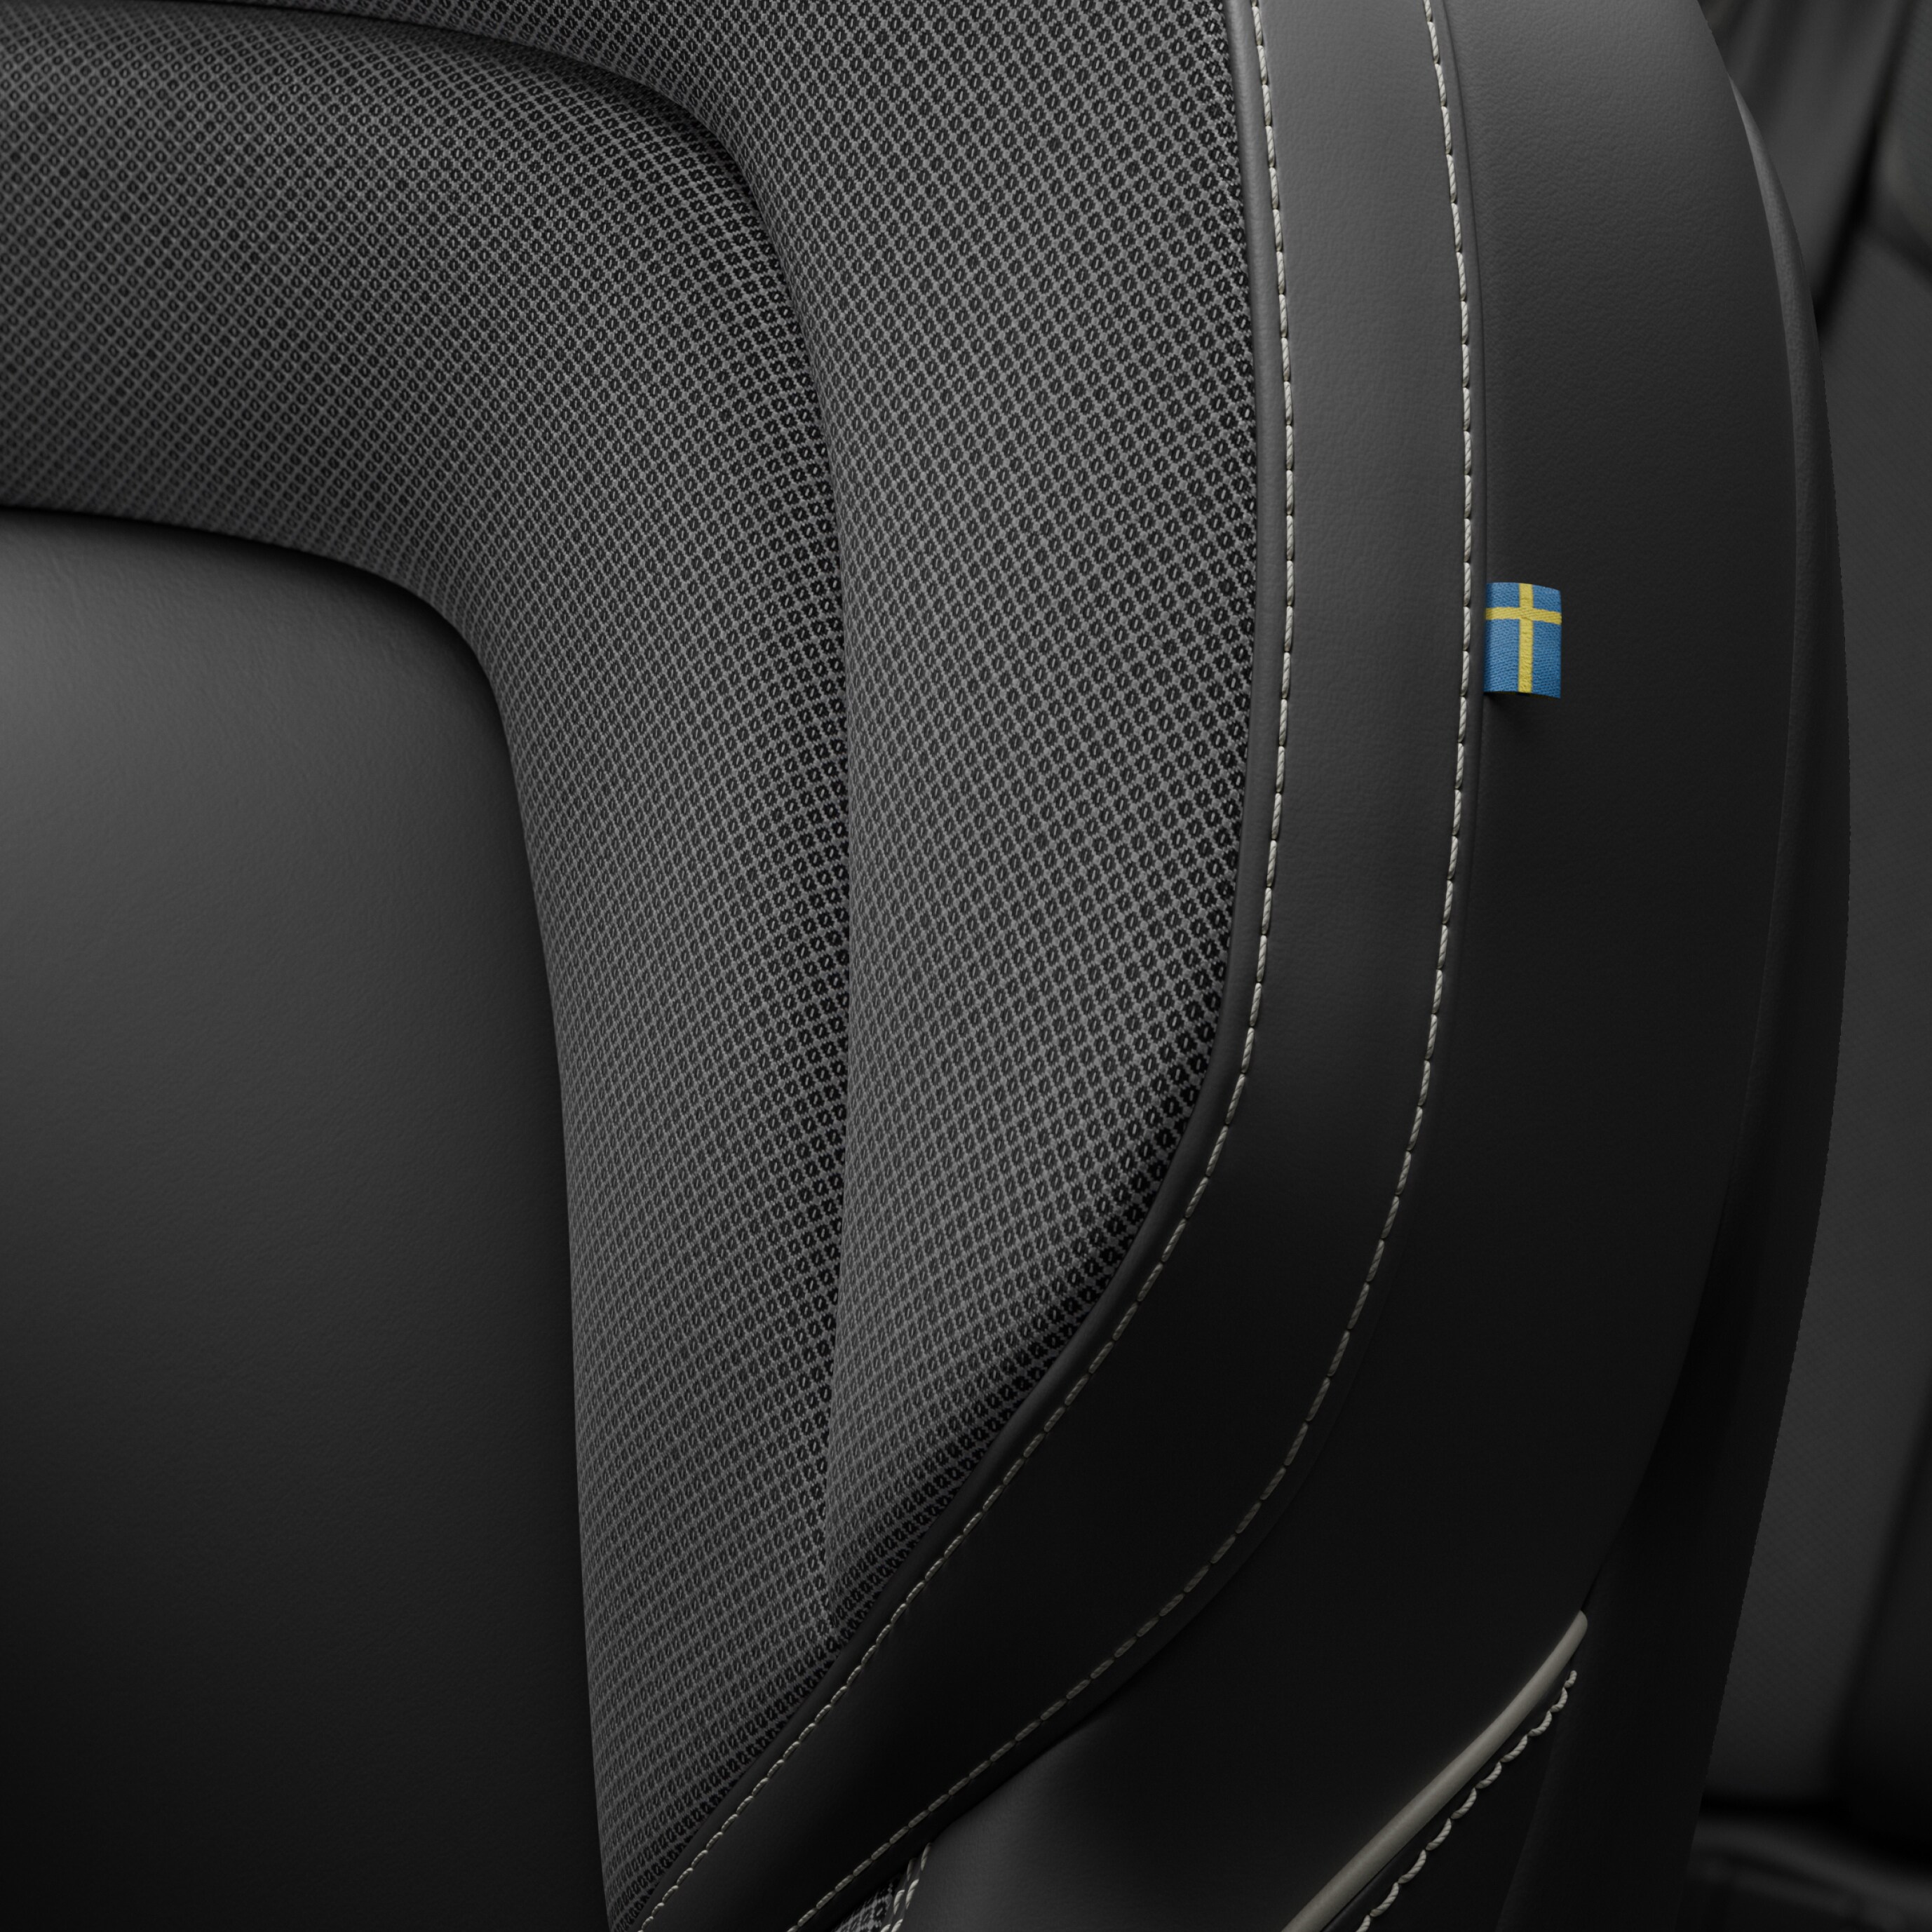 Interior close-up of the Tailored Wool Blend upholstery in the Volvo S60 Recharge.